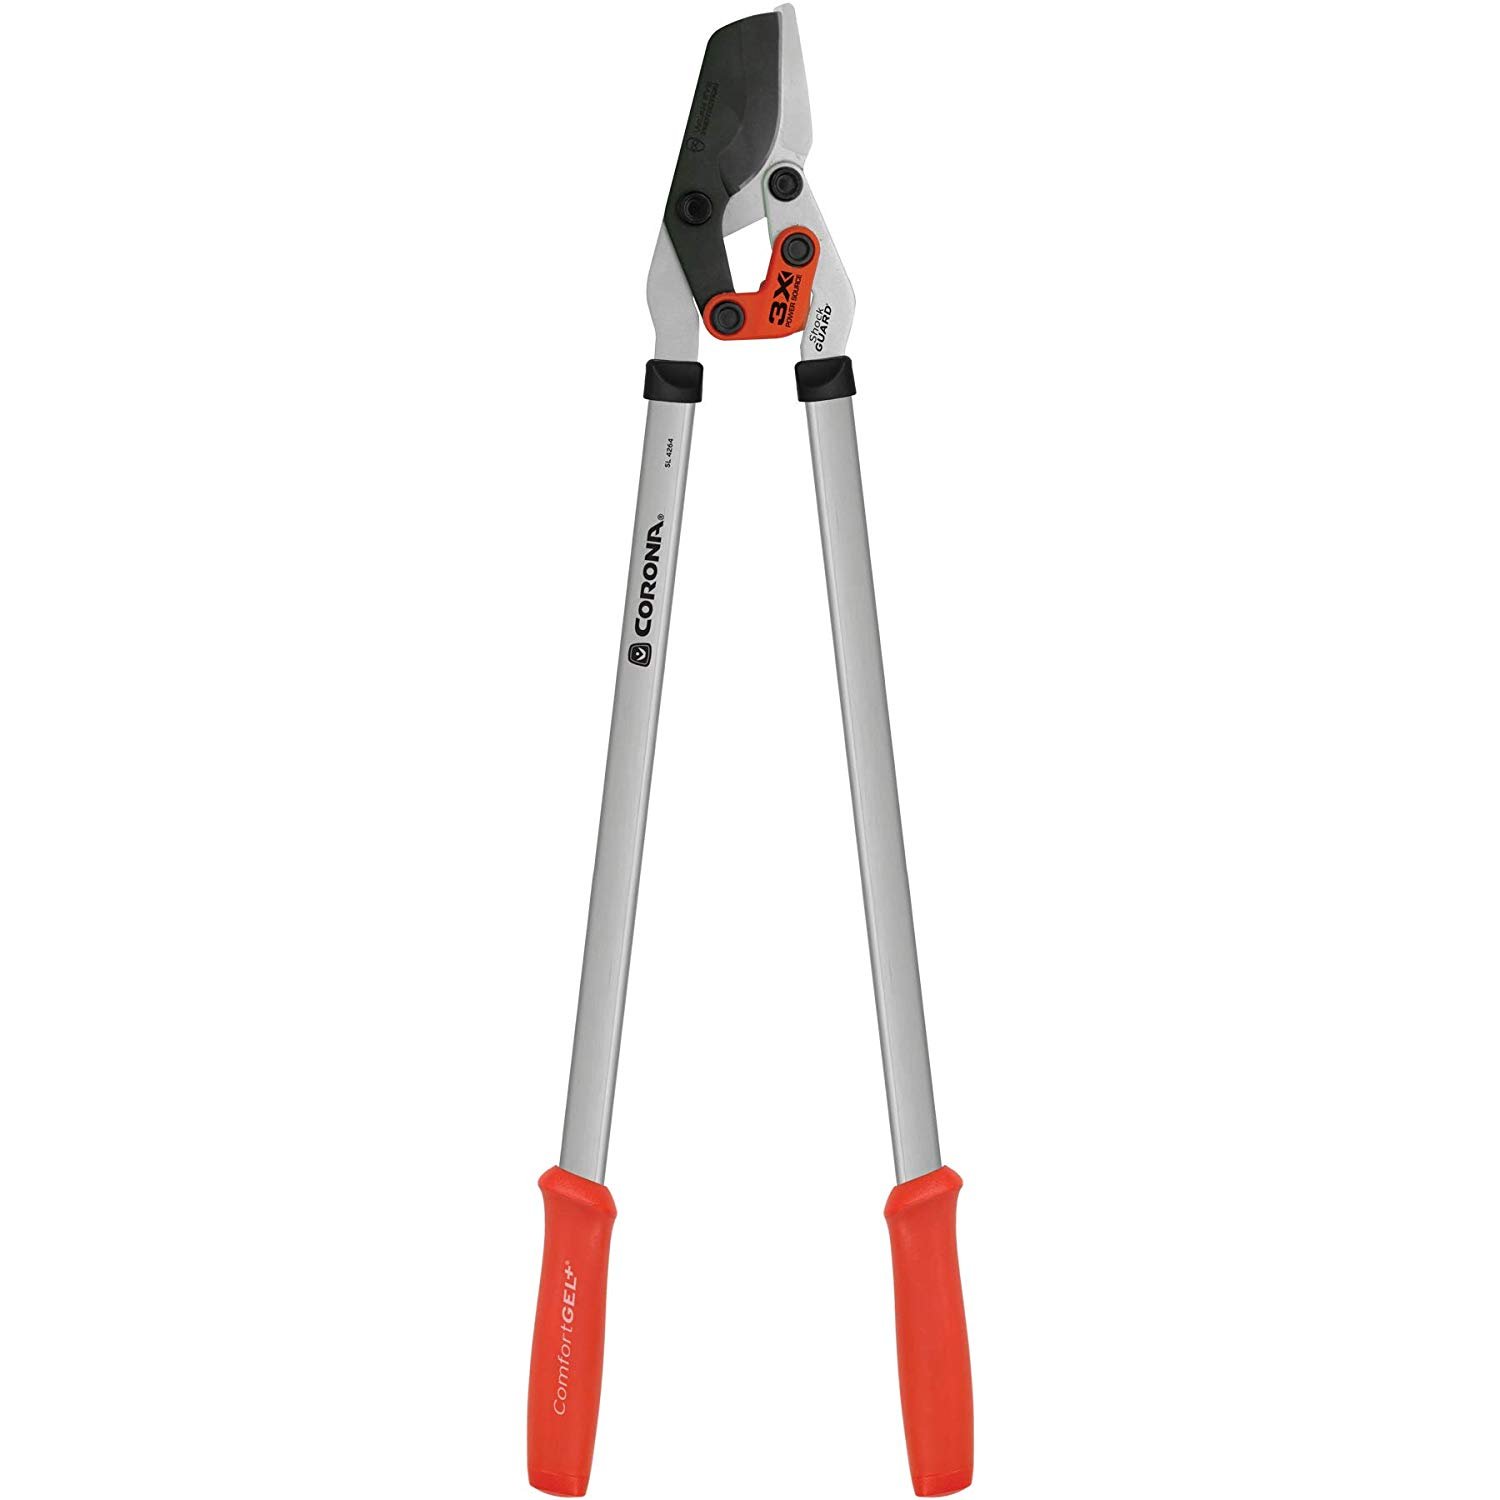 Corona SL 4264 DualLINK Bypass Lopper with ComfortGEL Grips, 1-3/4 Inch - image 1 of 6